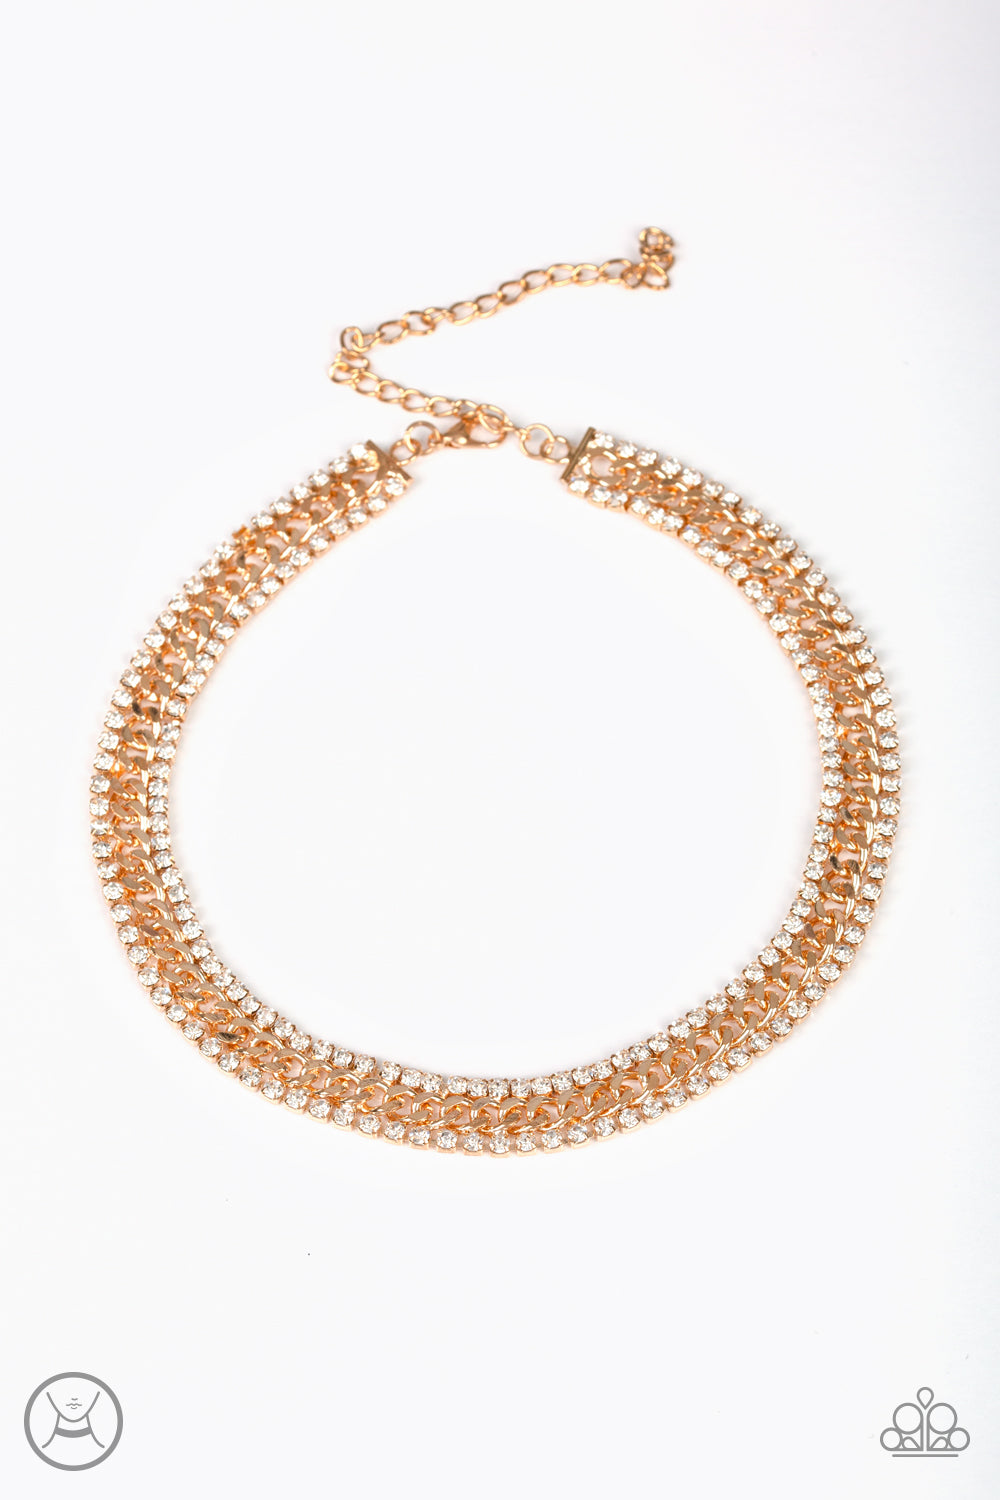 Empo-HER-ment - Gold choker necklace